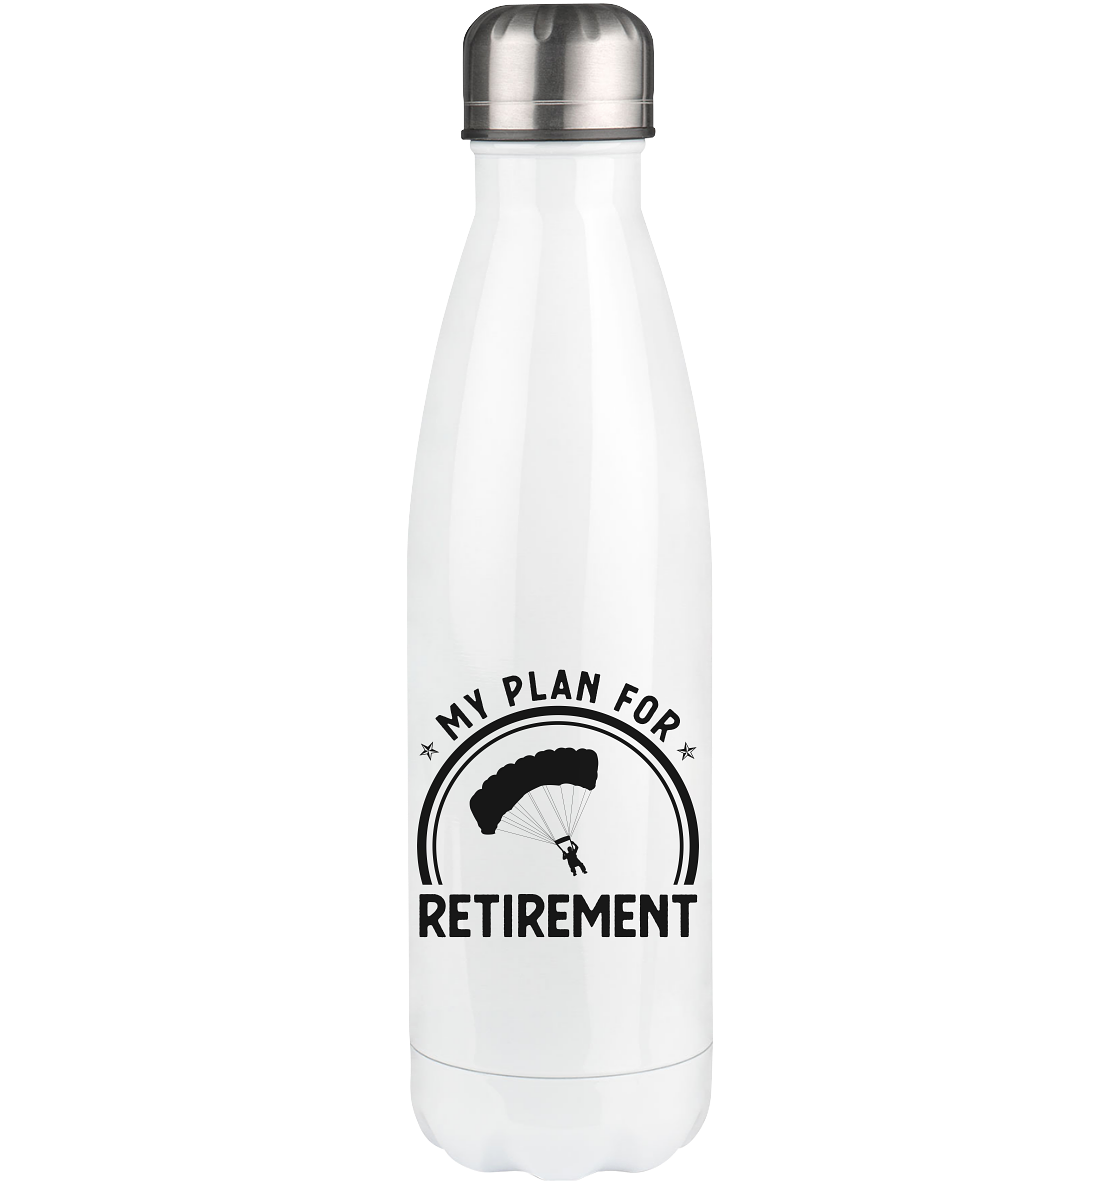 My Plan For Retirement 1 - Edelstahl Thermosflasche berge 500ml